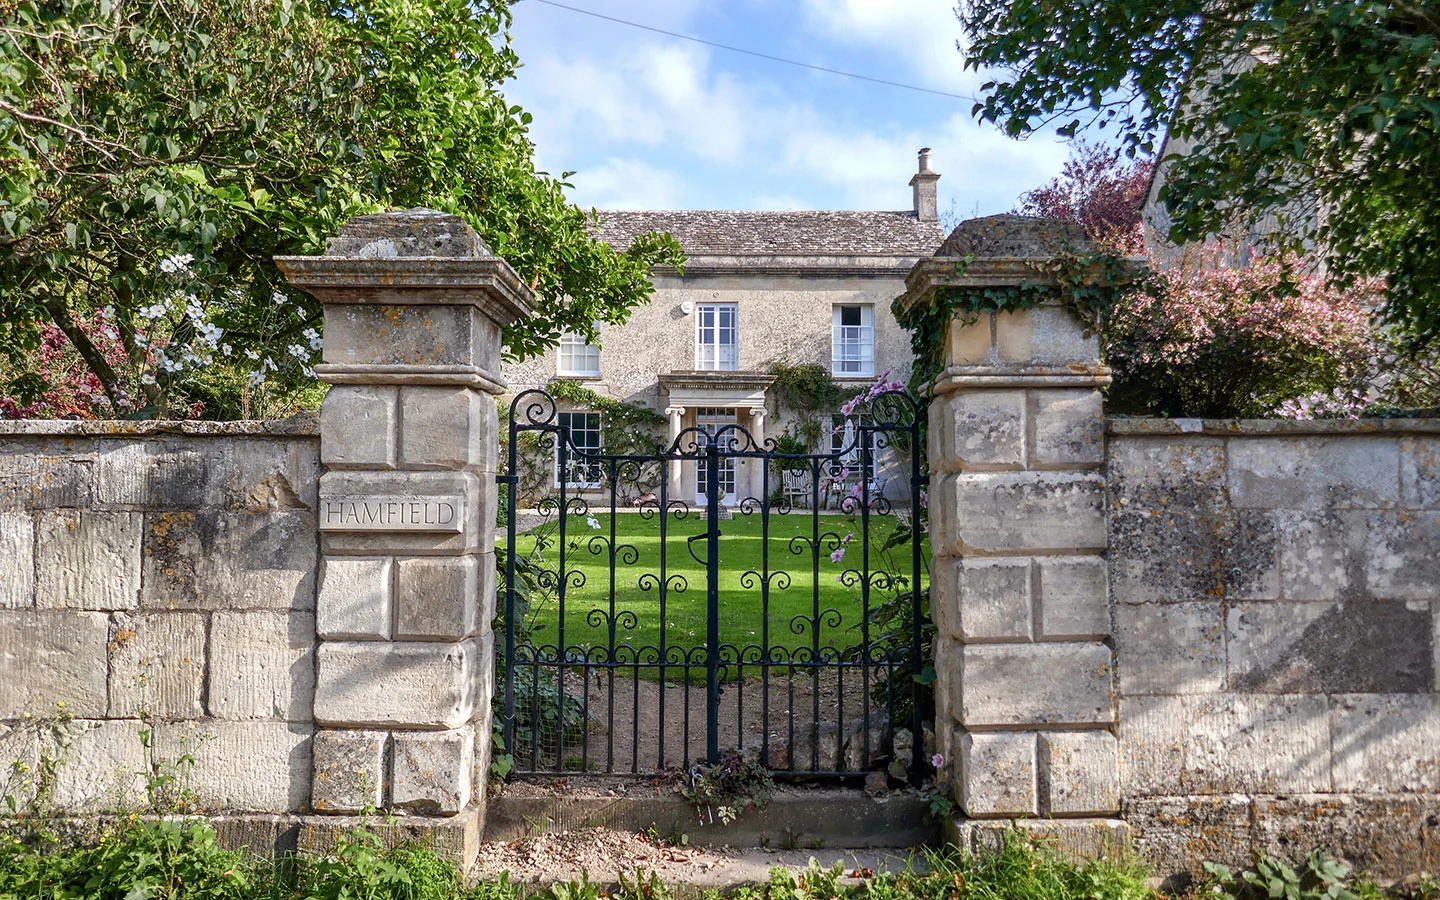 House in Painswick in the Cotswolds